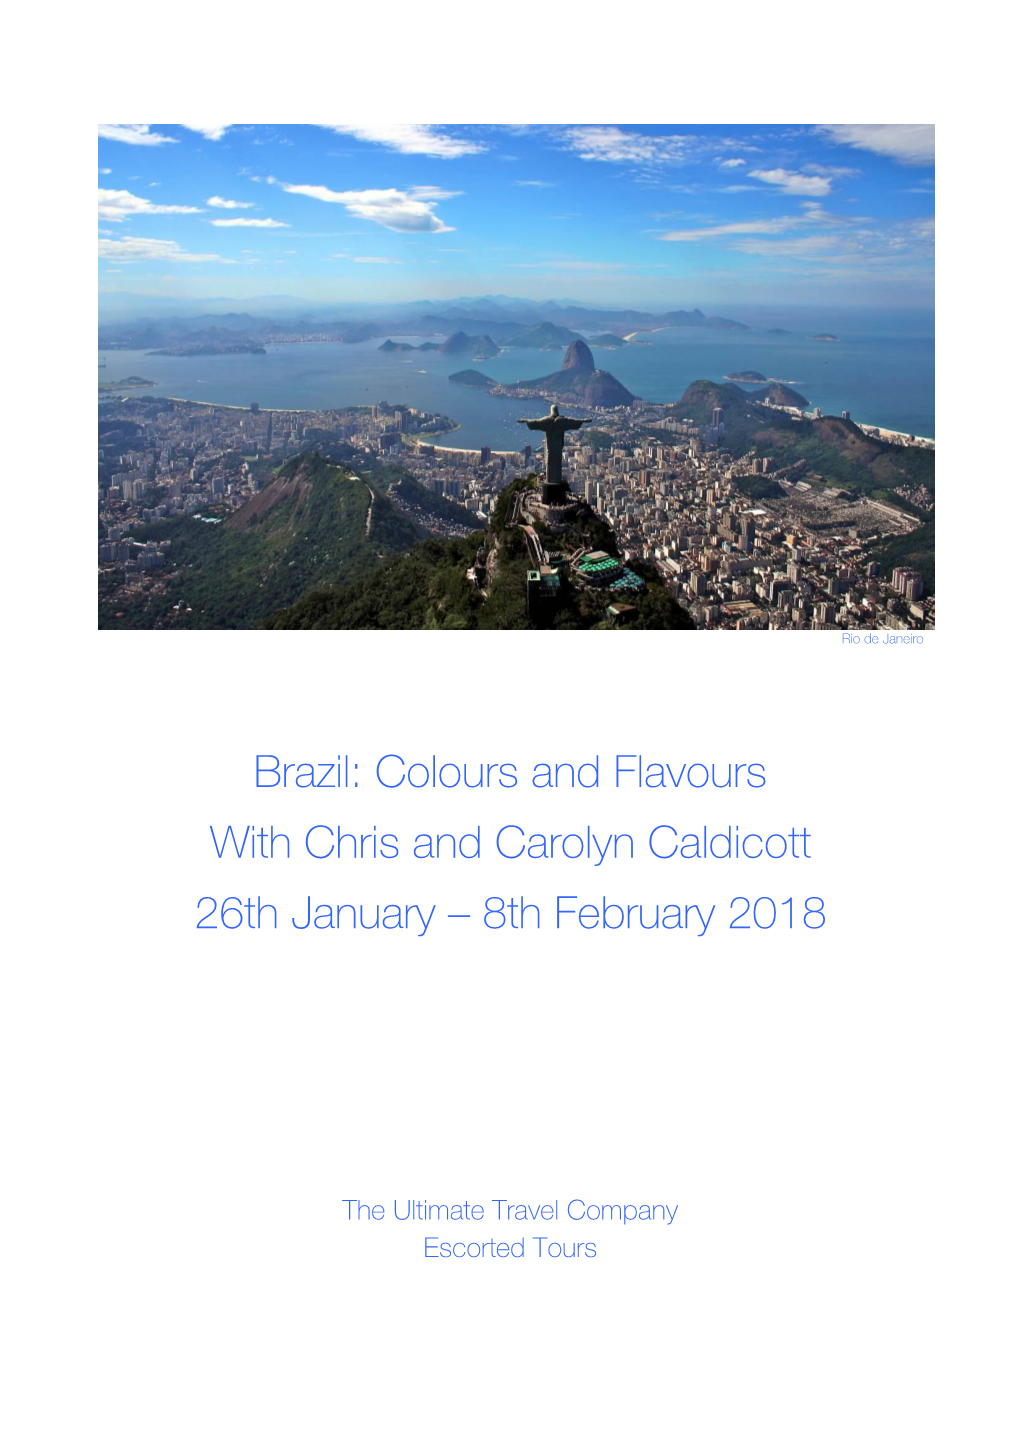 Brazil: Colours and Flavours with Chris and Carolyn Caldicott 26Th January – 8Th February 2018